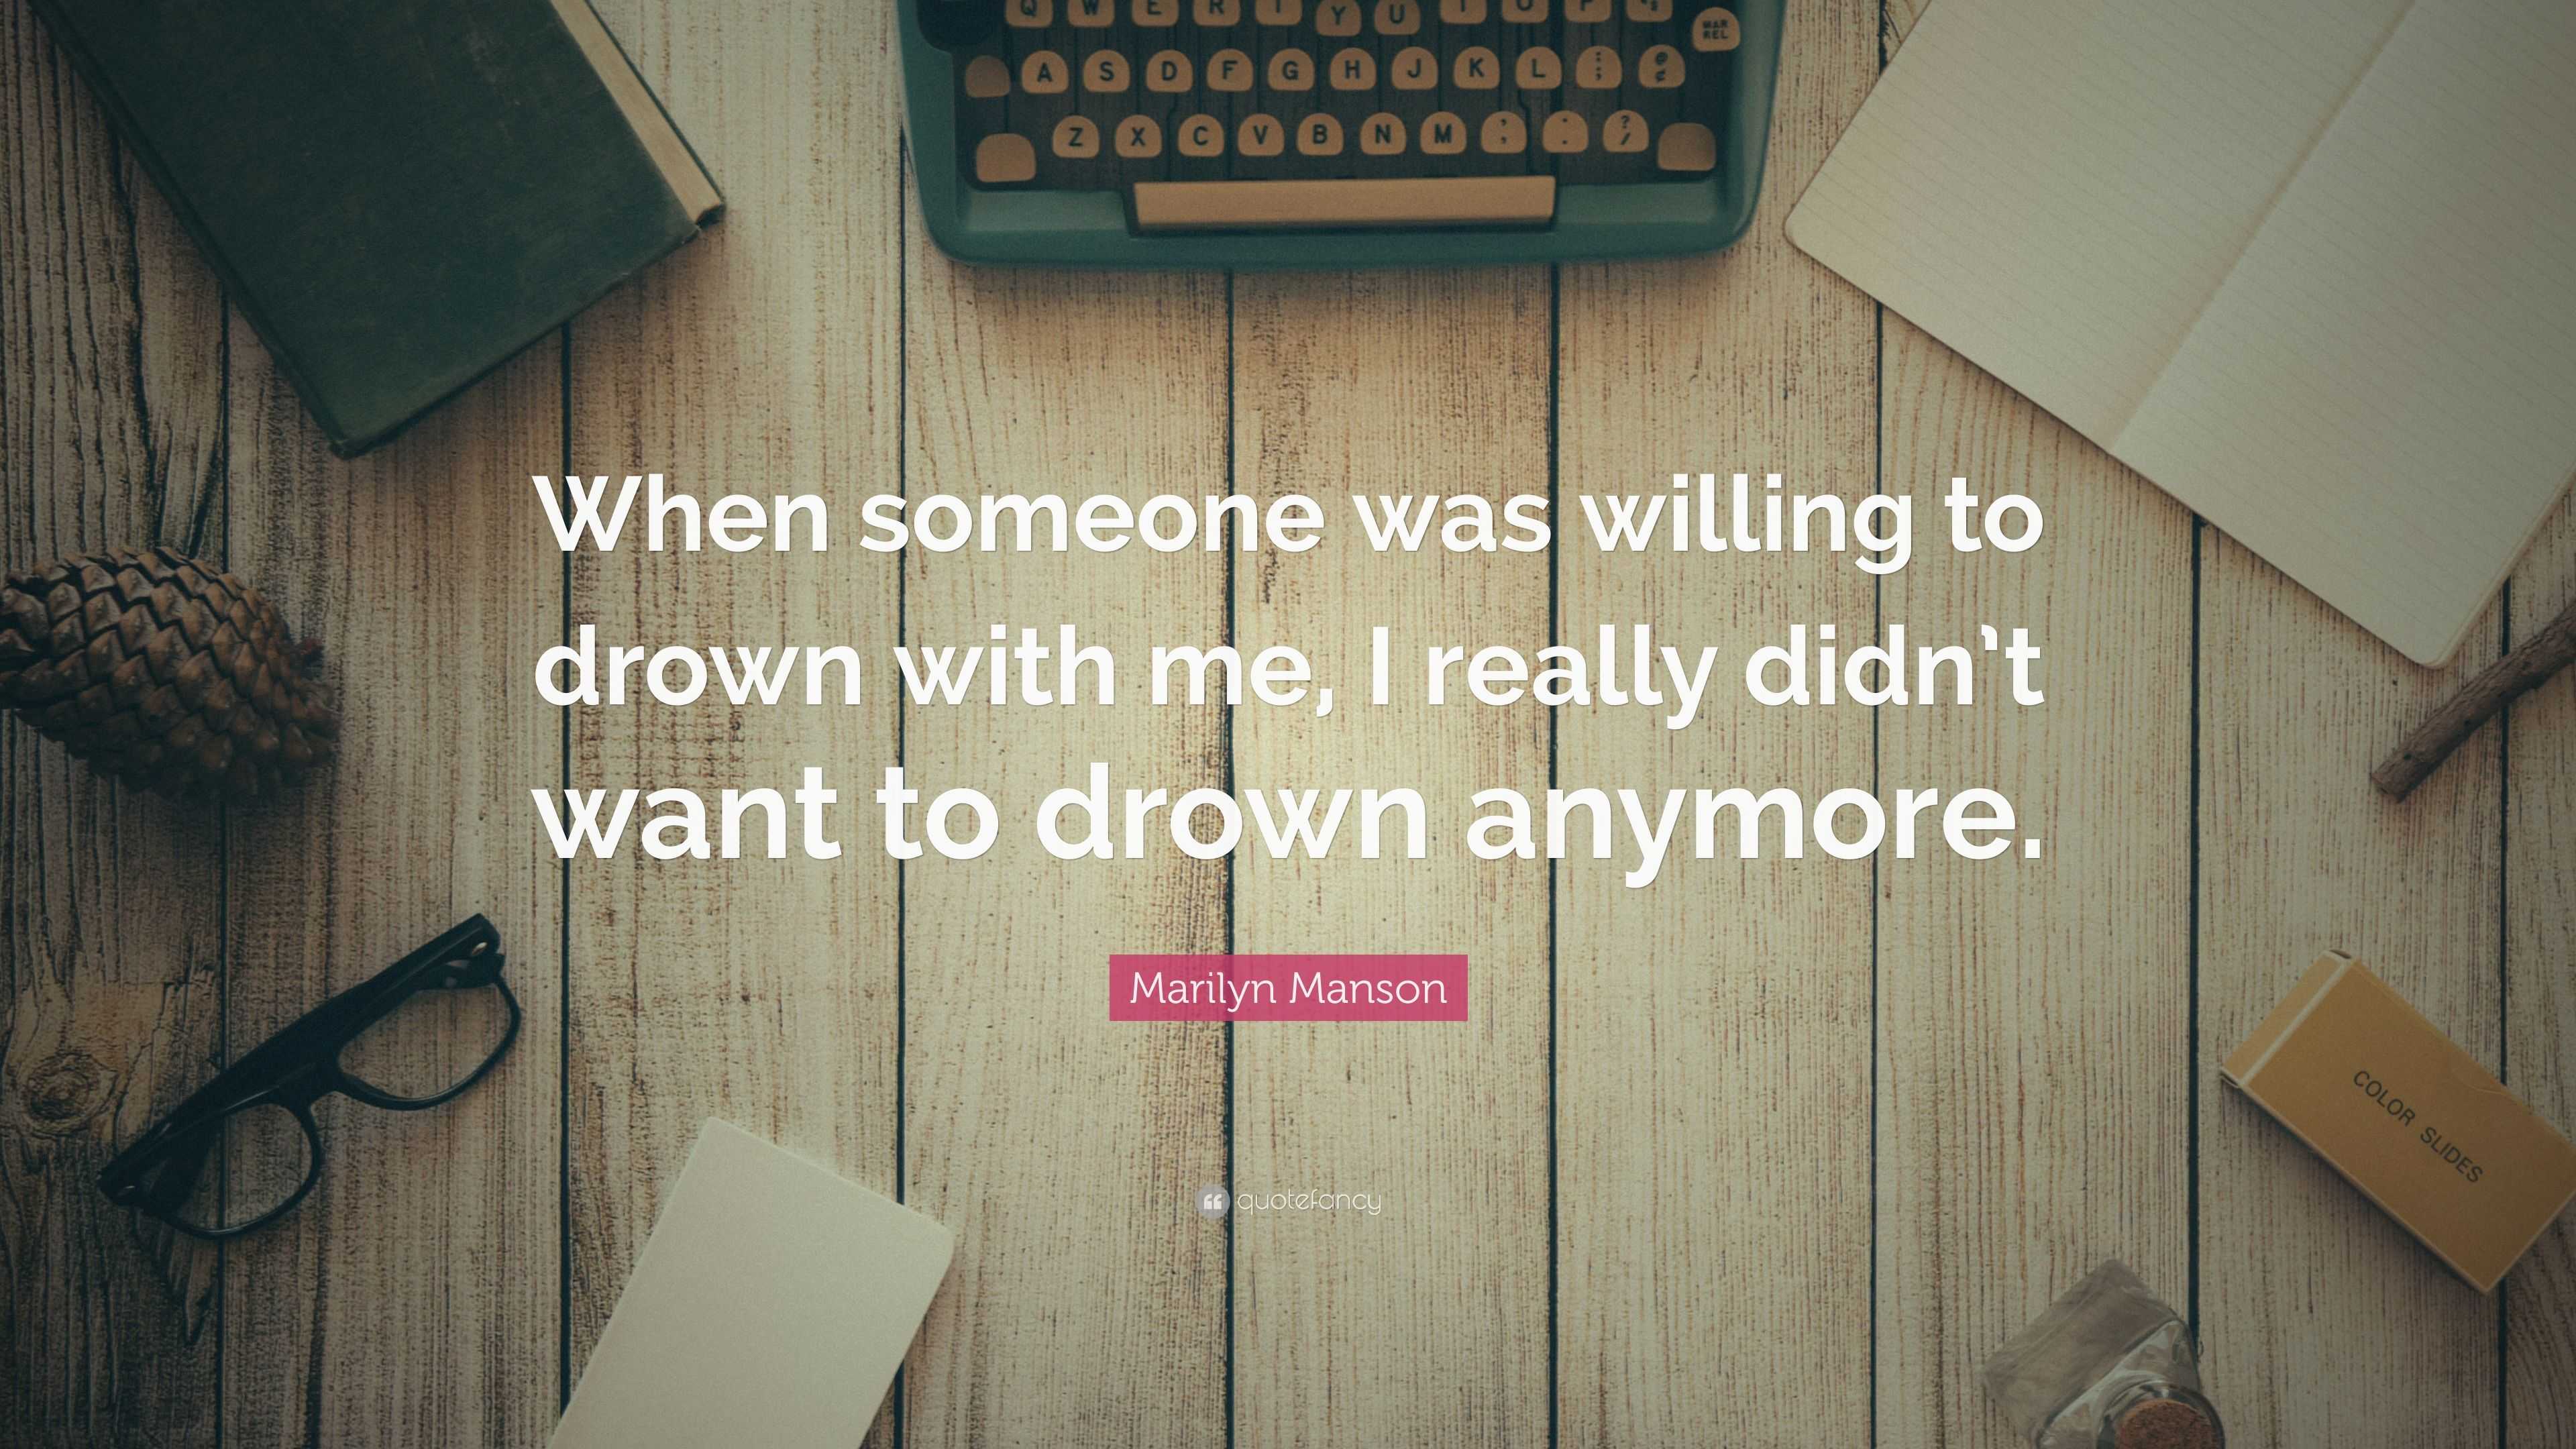 I really didnt want to drown anymore When someone was willing to drown with me LH00040299 Quote by Marilyn Manson Wooden Letter Rack / Holder 